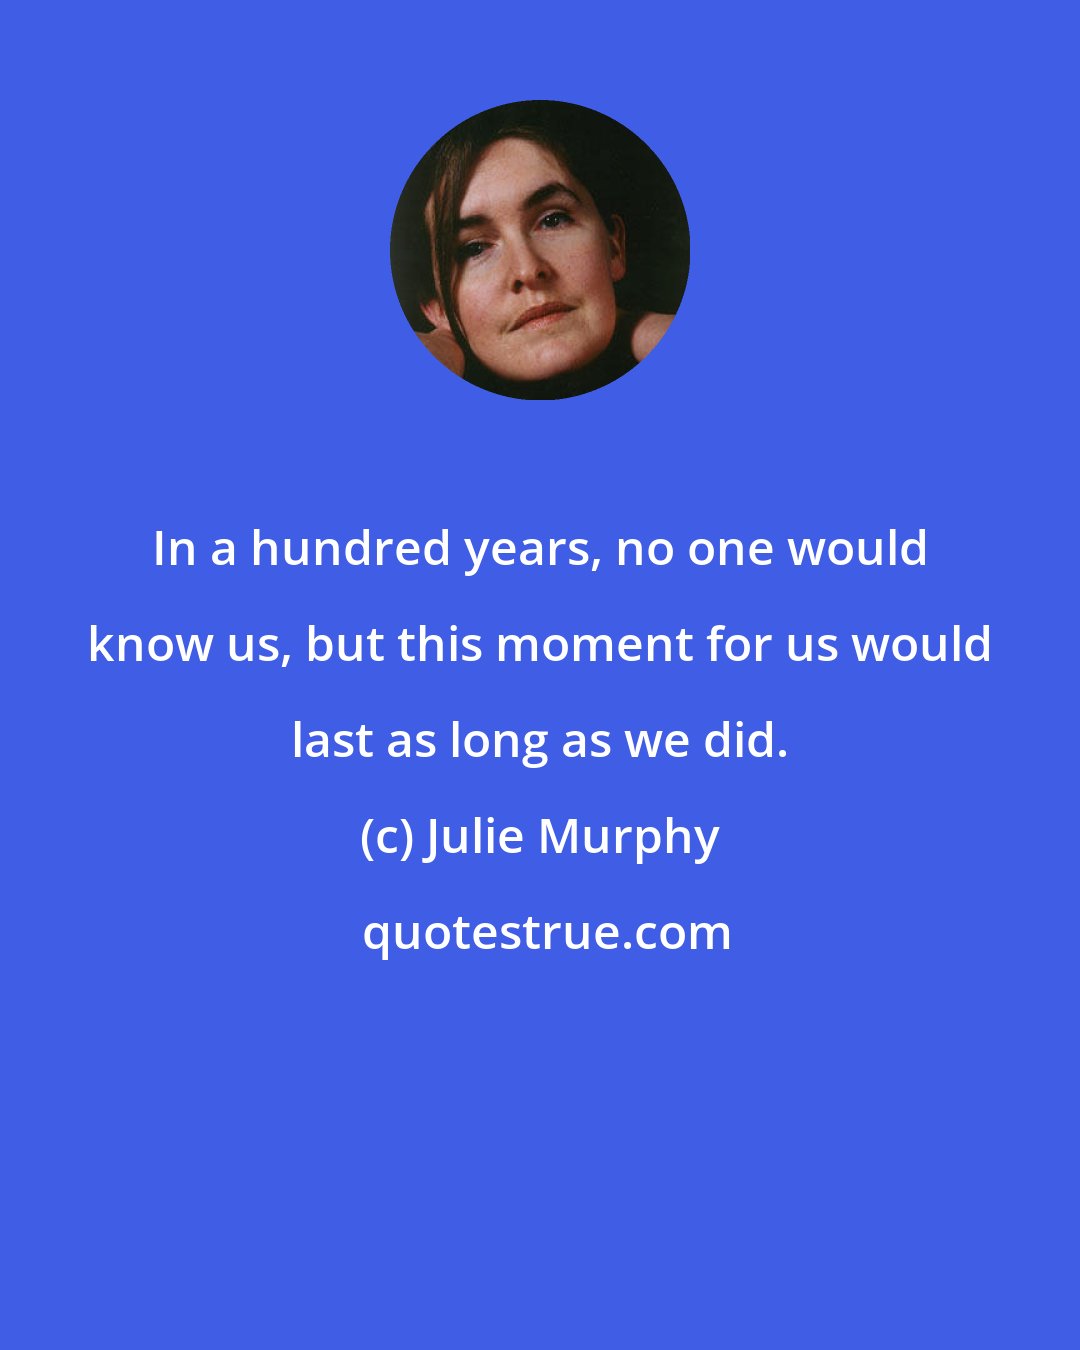 Julie Murphy: In a hundred years, no one would know us, but this moment for us would last as long as we did.